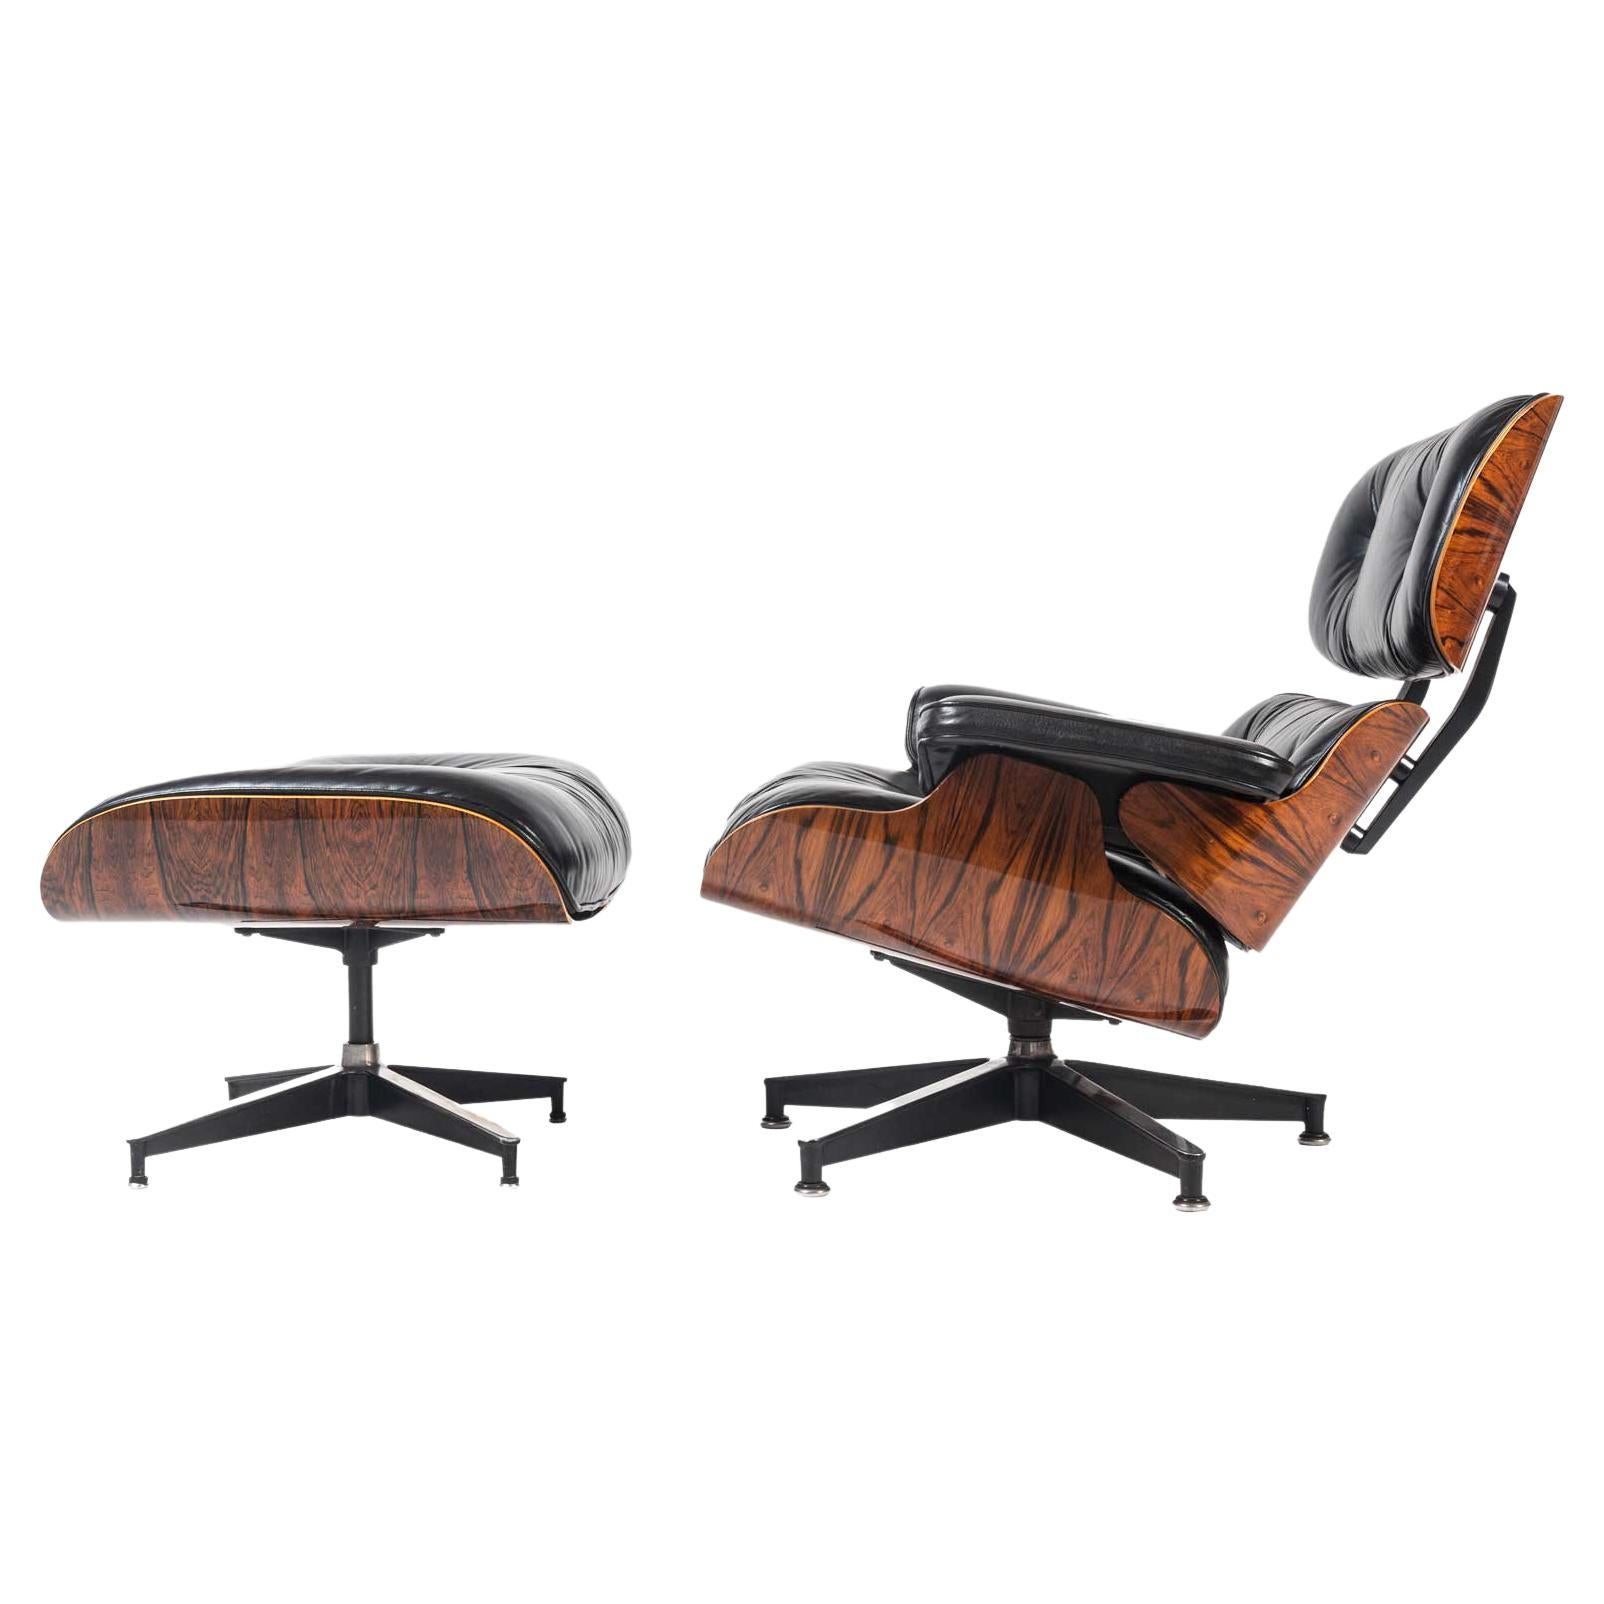 Fully Restored 3rd Gen Eames Lounge Chair 670 and Ottoman 671 in Black Leather